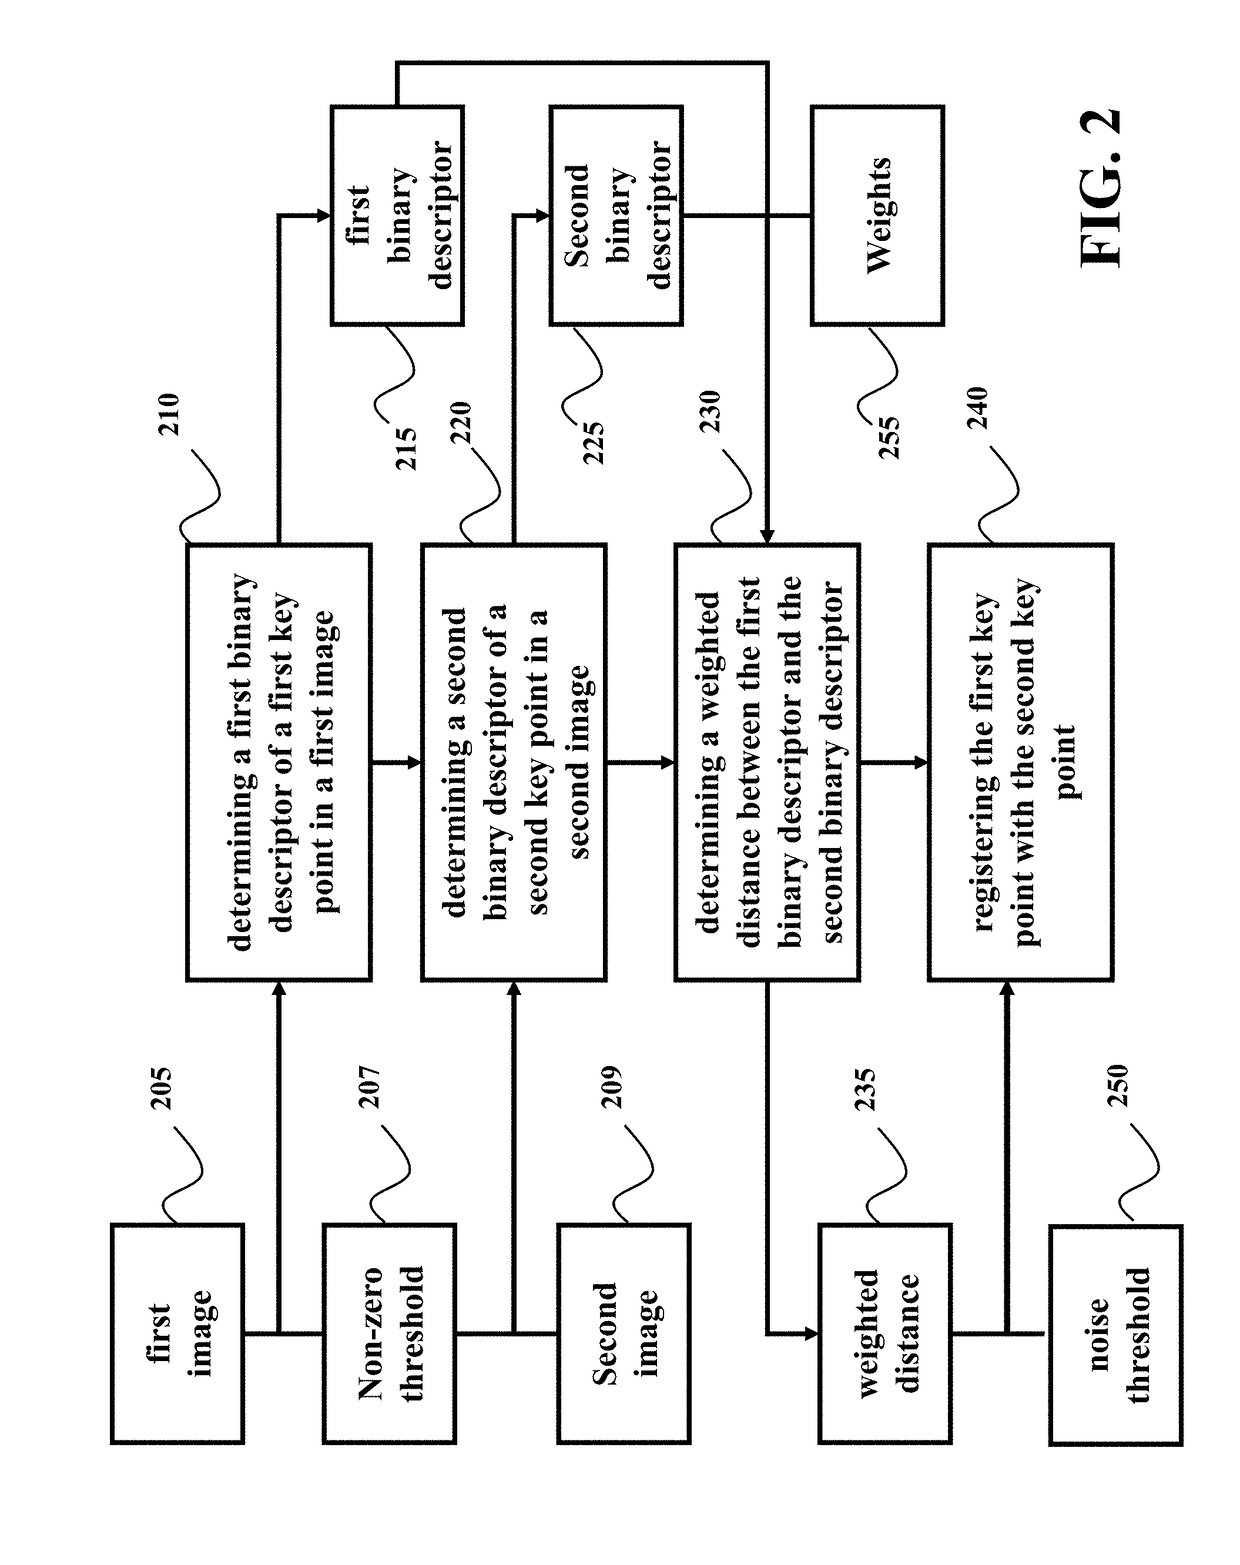 Method and System for Image Registrations